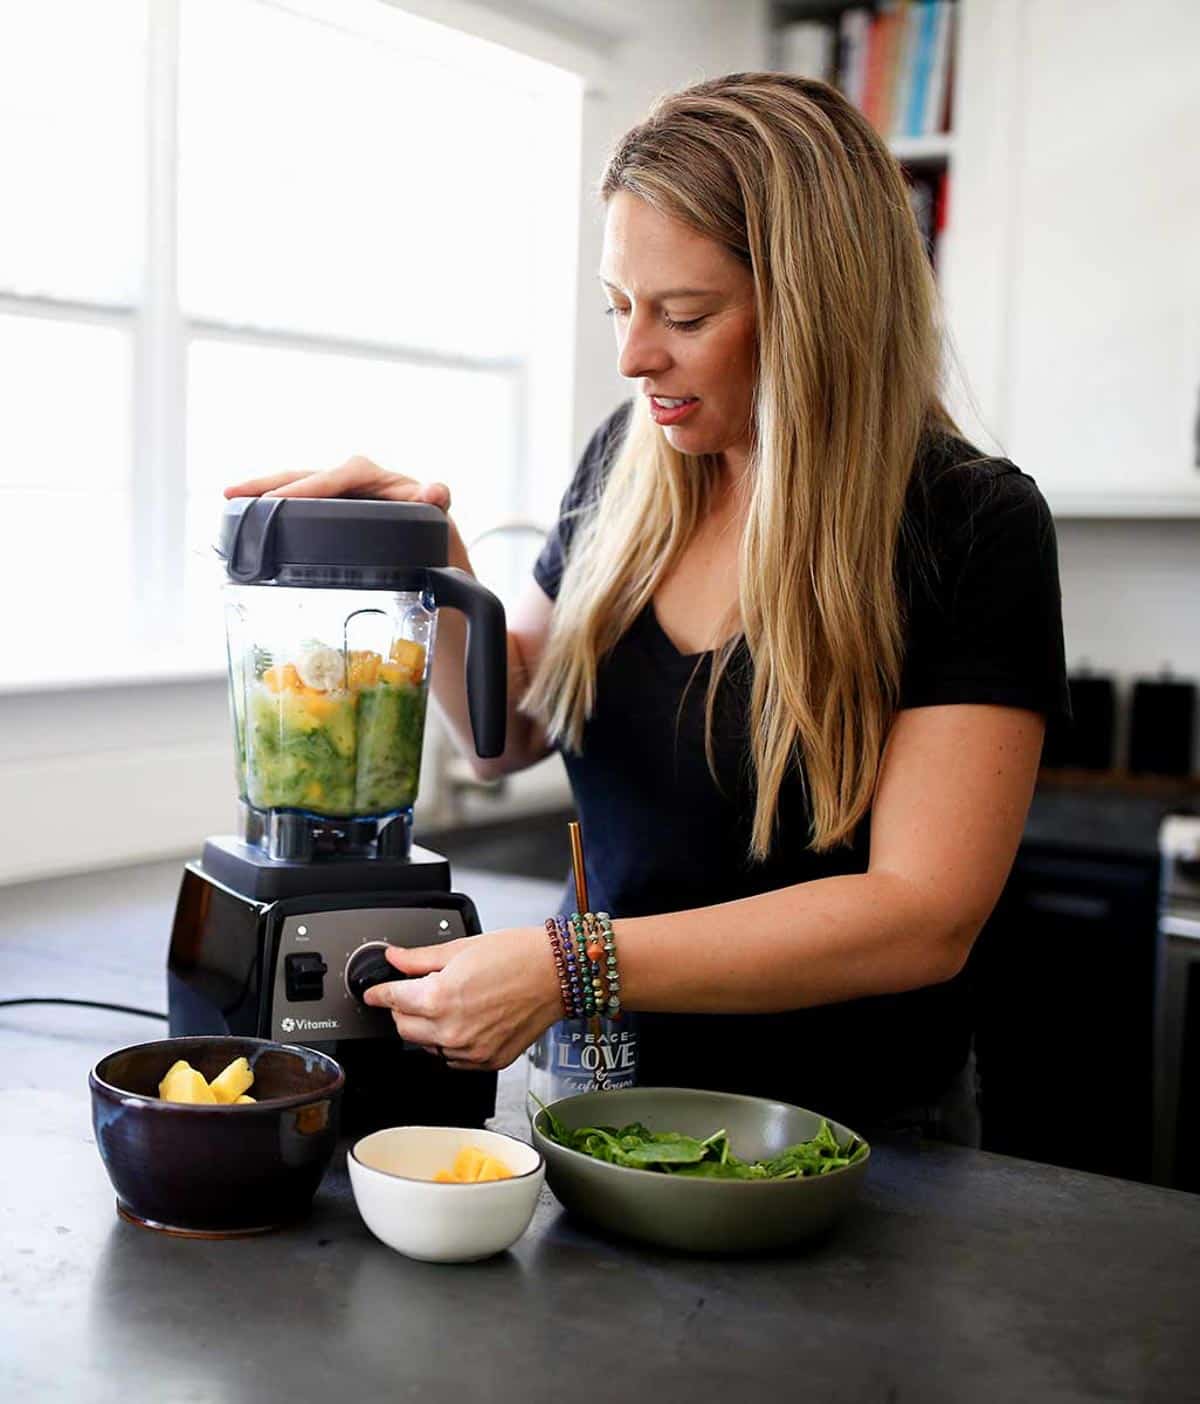 A blond woman blending weight loss smoothies in her kitchen on concrete countertop.